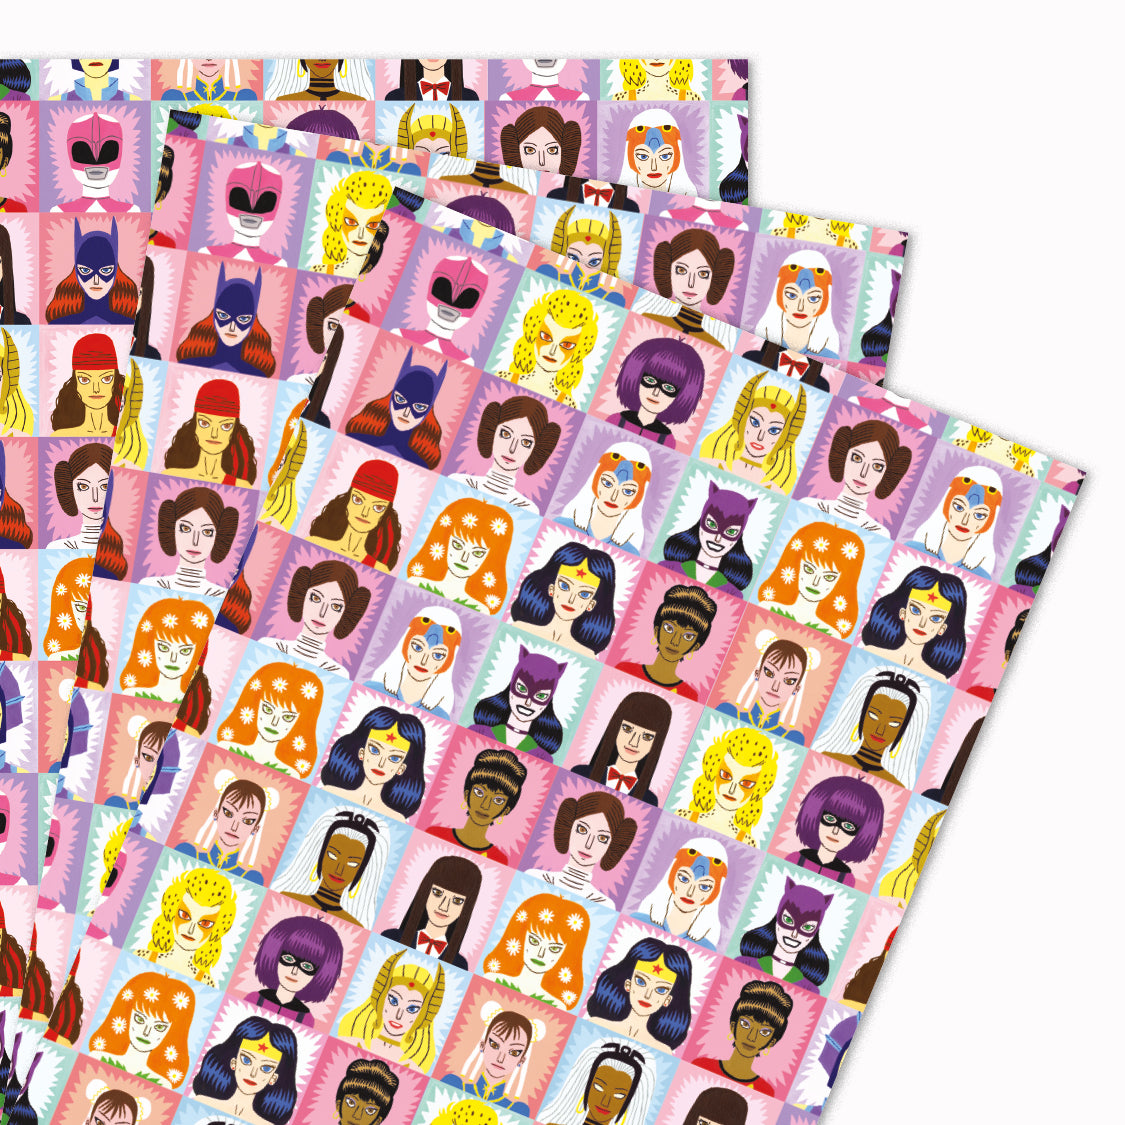 Pack of 3 'Heroines and Villains' gift wrap sheets illustrated by&nbsp;Jack Teagle for USTUDIO Design. This design features an illustrative interpretation of some of the best loved and most iconic heroines and villains. A cult classic design loved by kids both big and small.